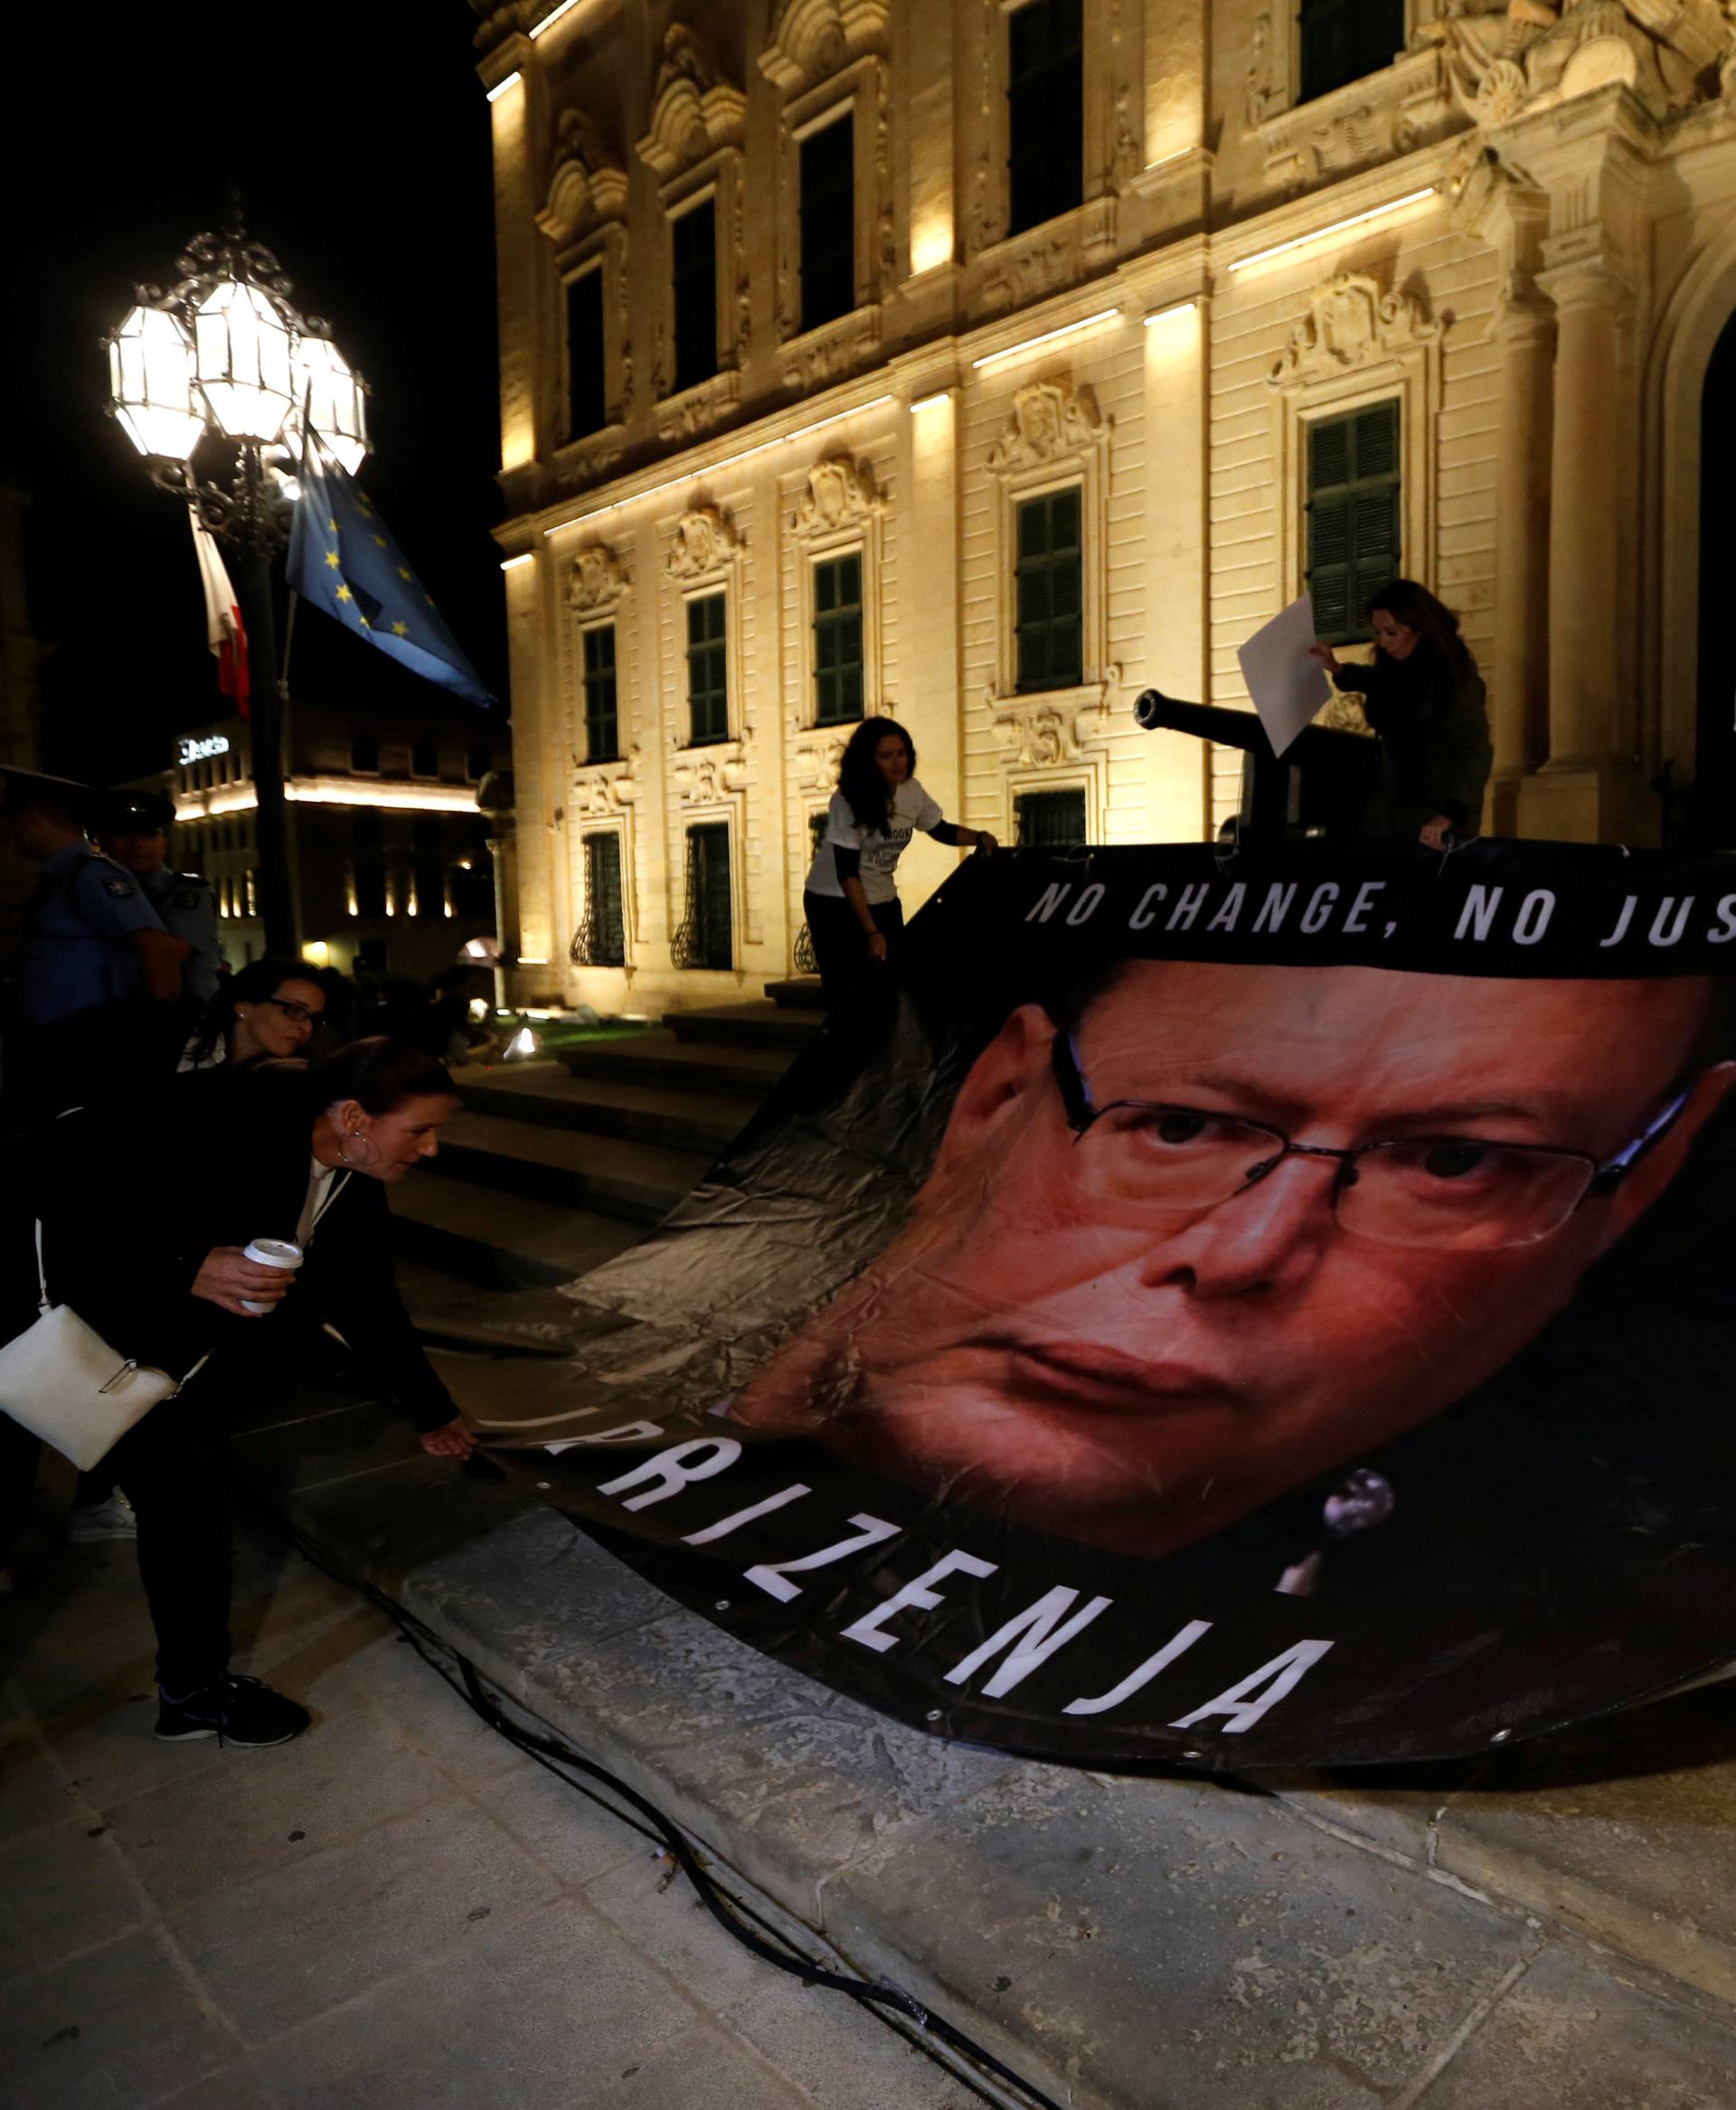 Protestors lay down a banner calling on Malta Police Commissioner Cutajar to resign on the steps of the Auberge de Castille, at the start of a four-day protest against the assassination of investigative journalist Daphne Caruana Galizia, in Valletta